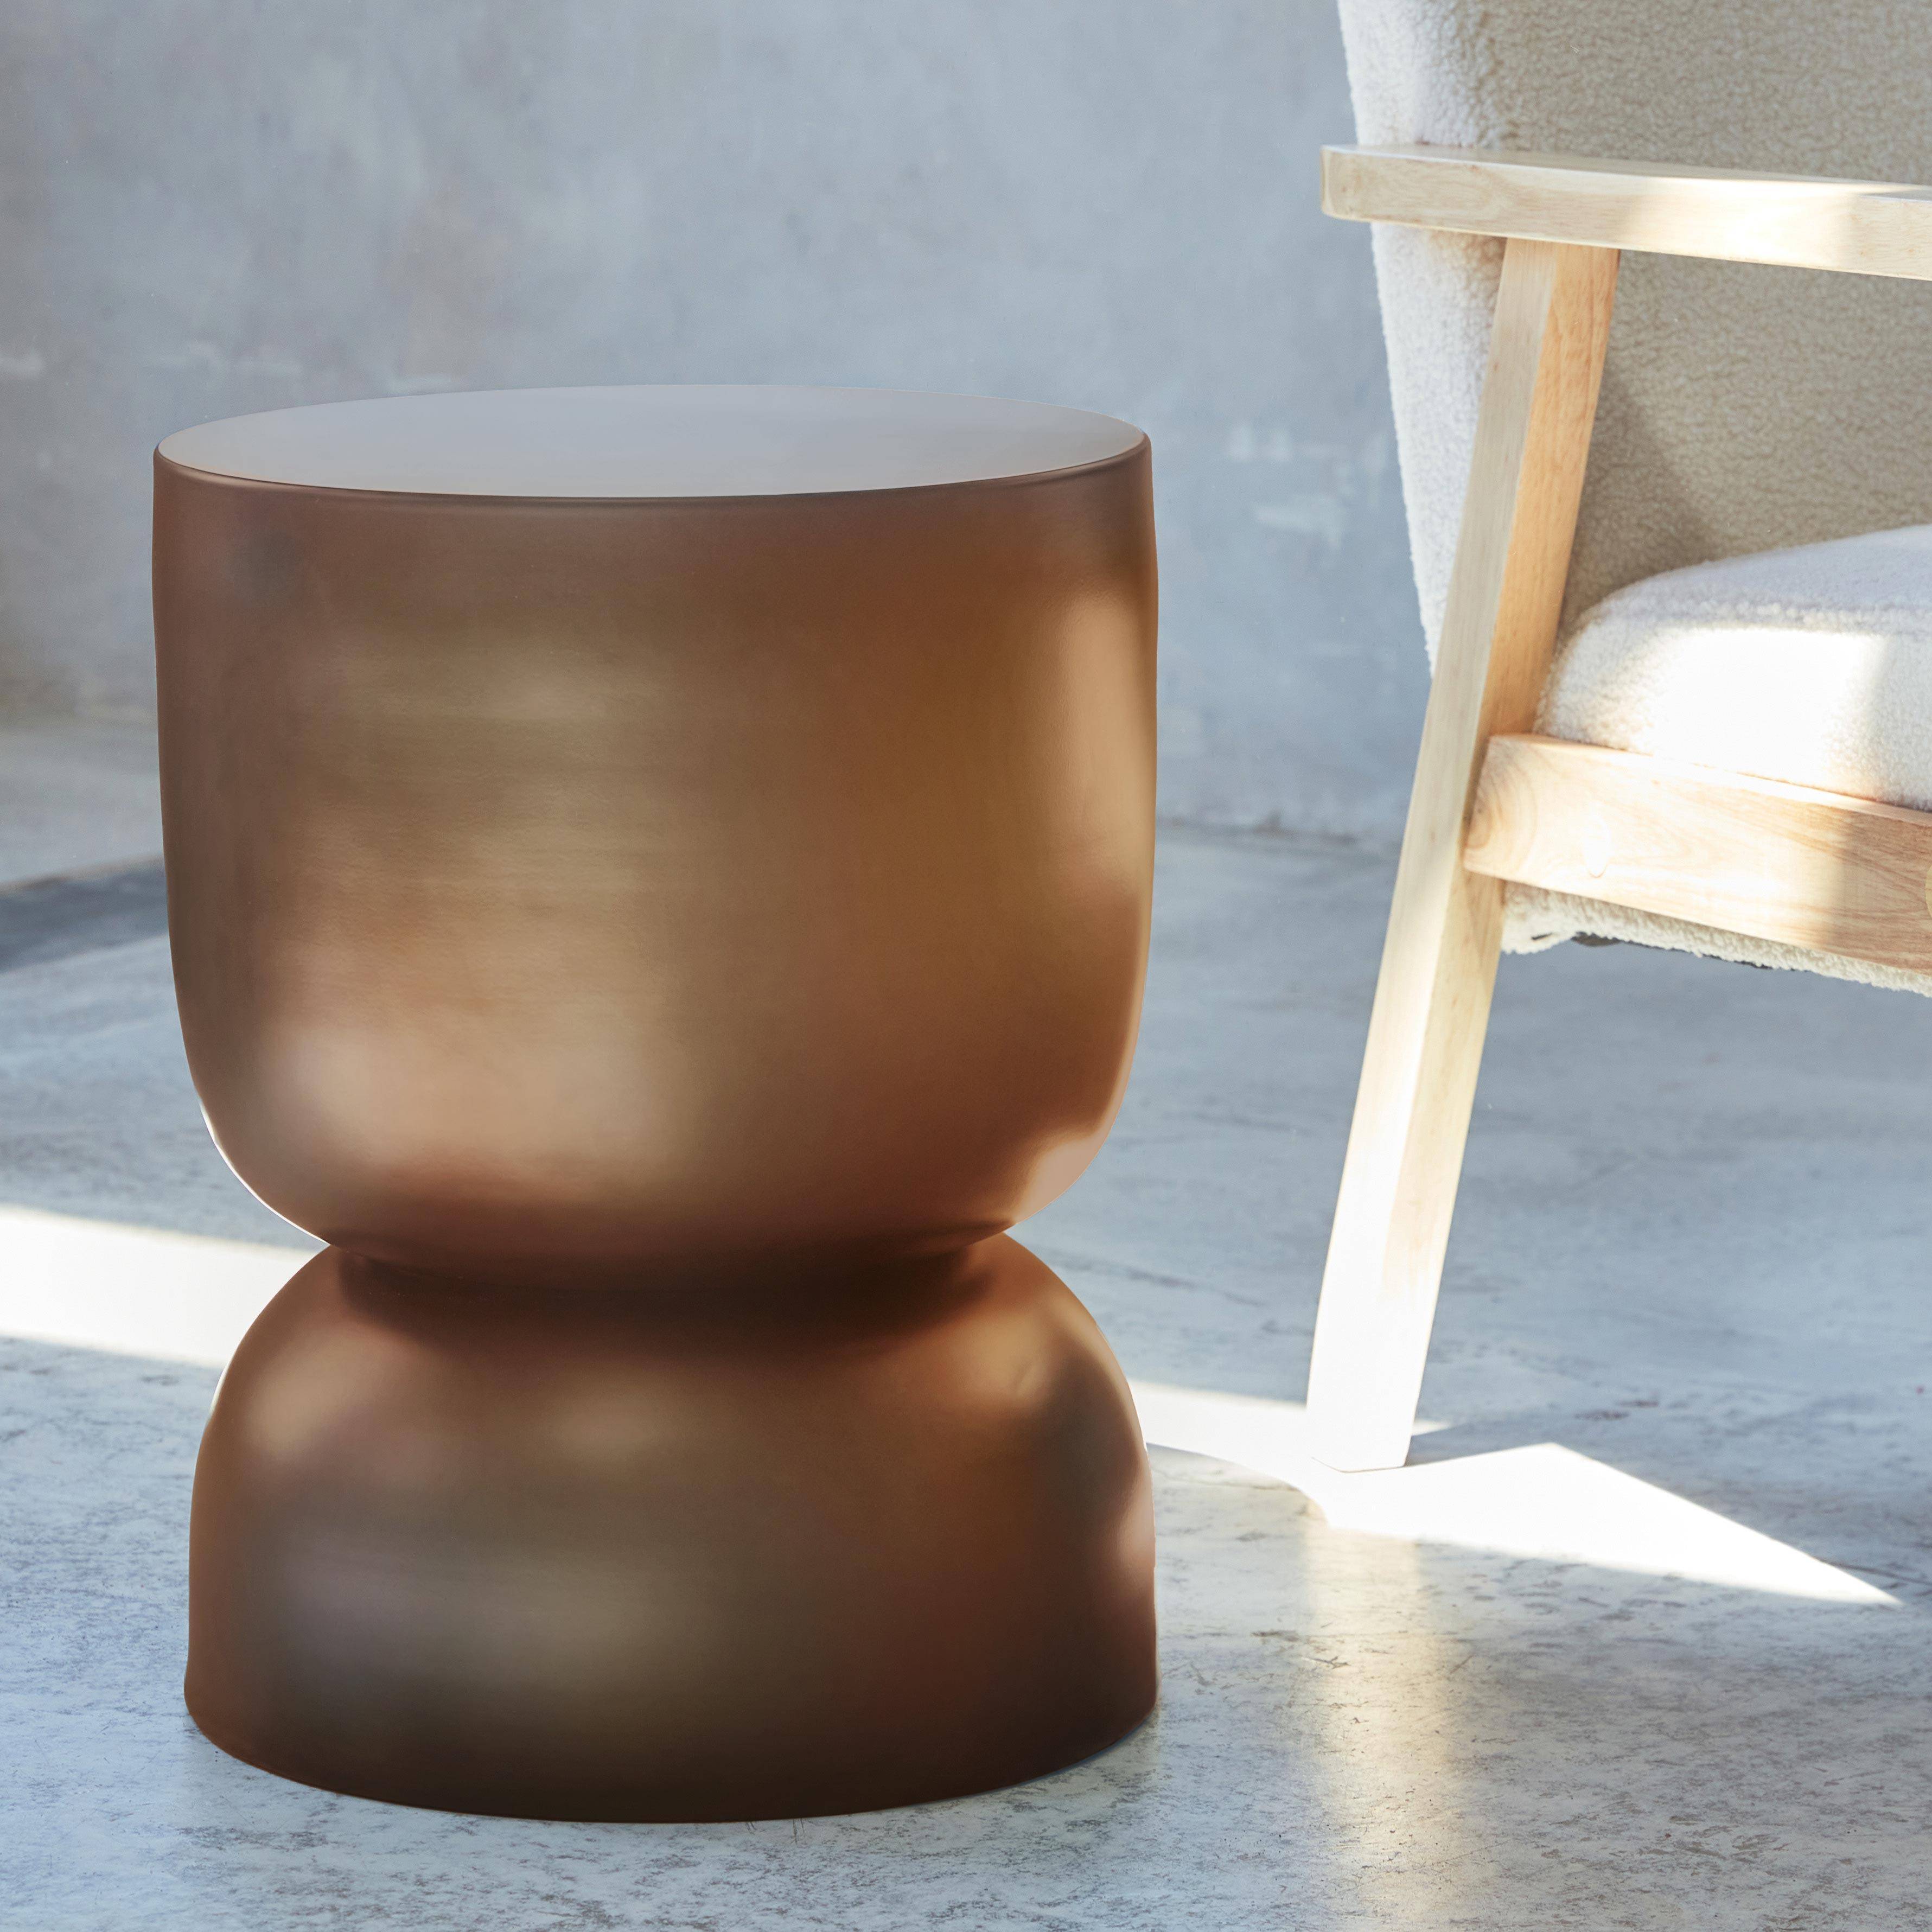 End Table, Side Table, Bedside Table in Metal, Ø32 x H 42cm, terracotta,sweeek,Photo1